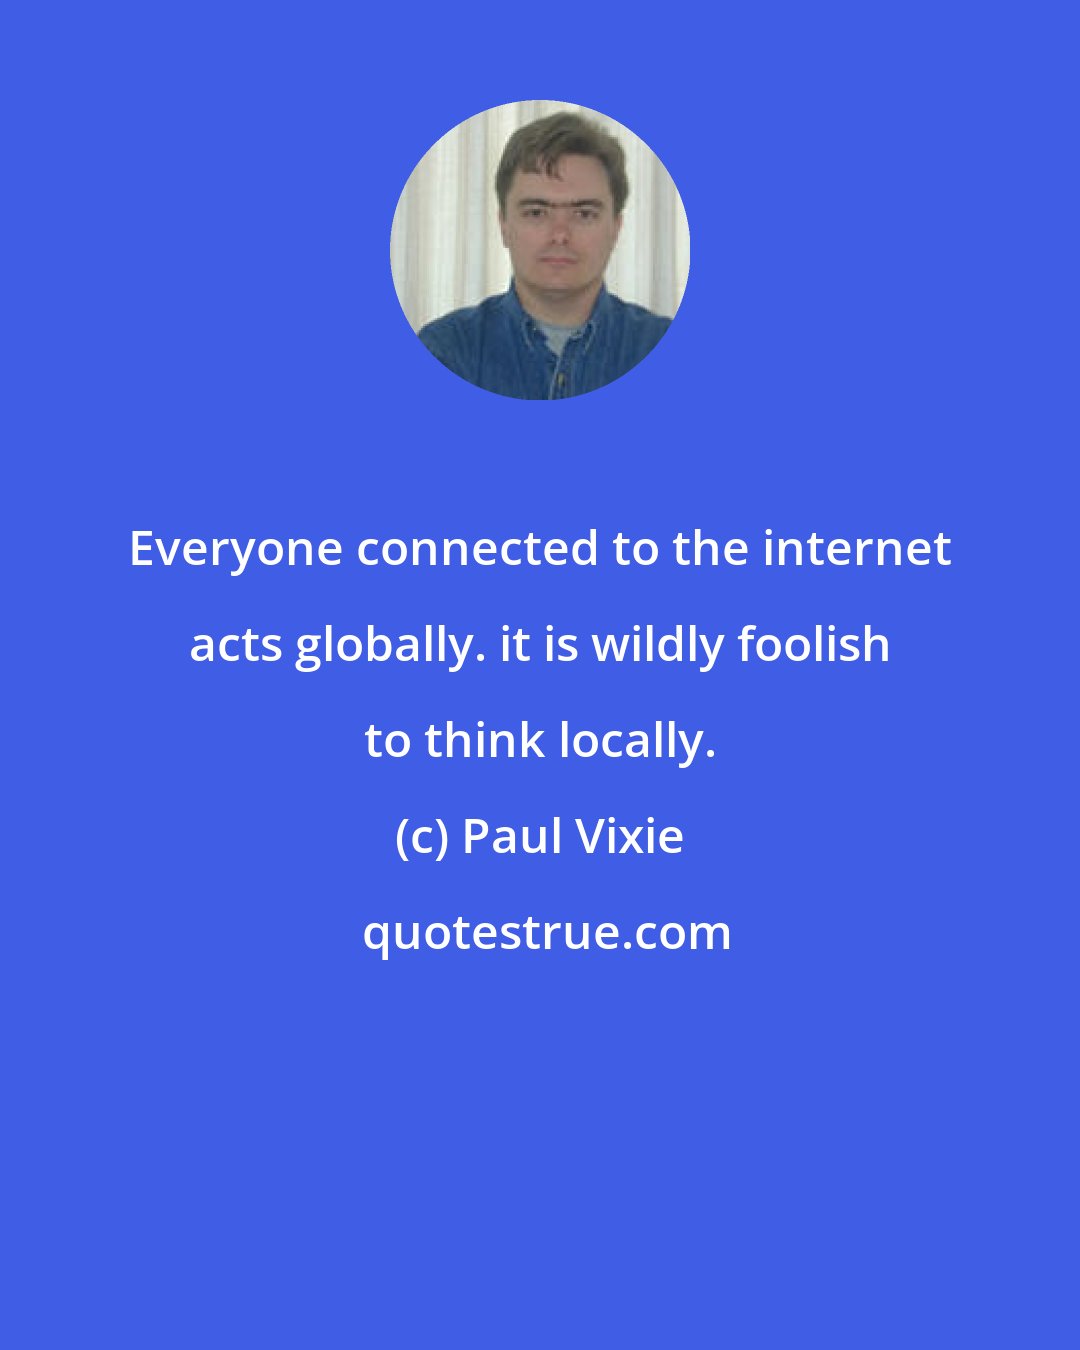 Paul Vixie: Everyone connected to the internet acts globally. it is wildly foolish to think locally.